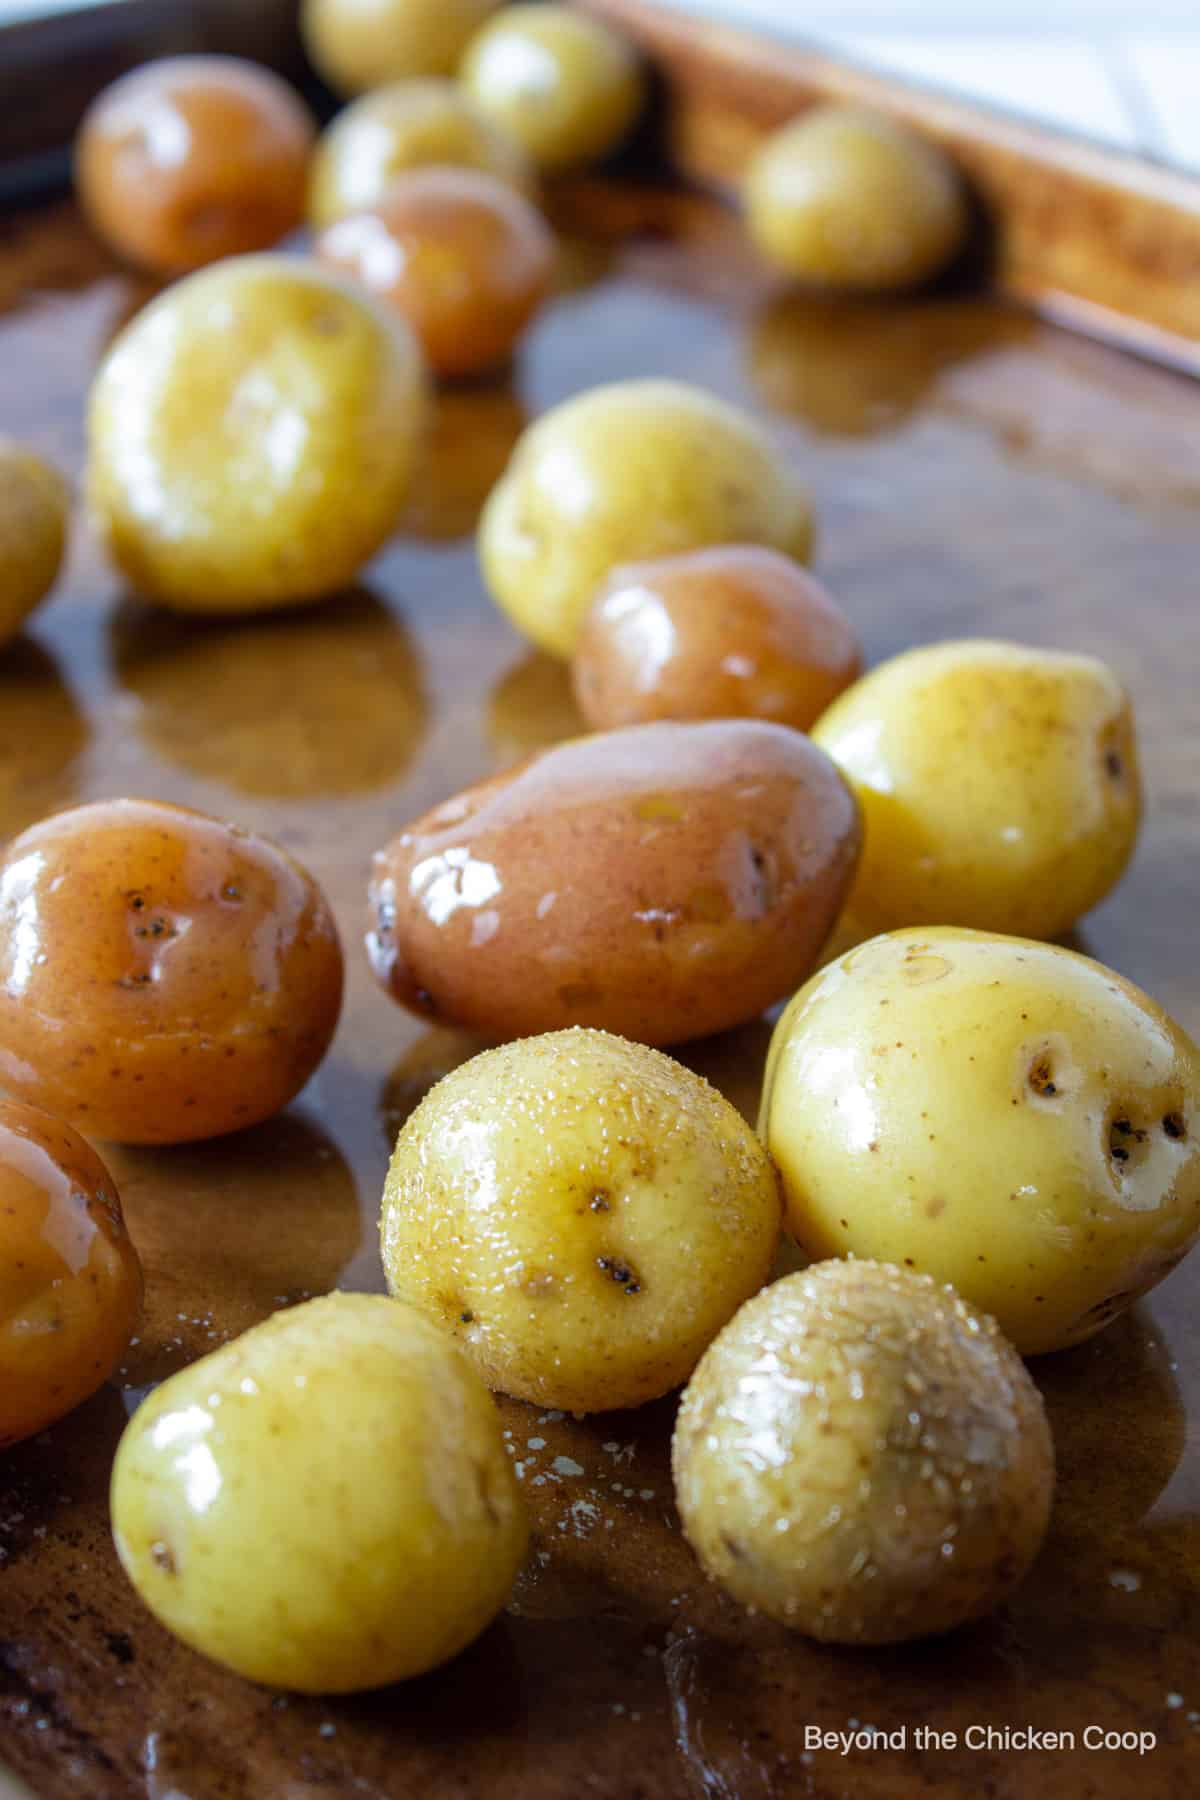 Small potatoes covered in oil.